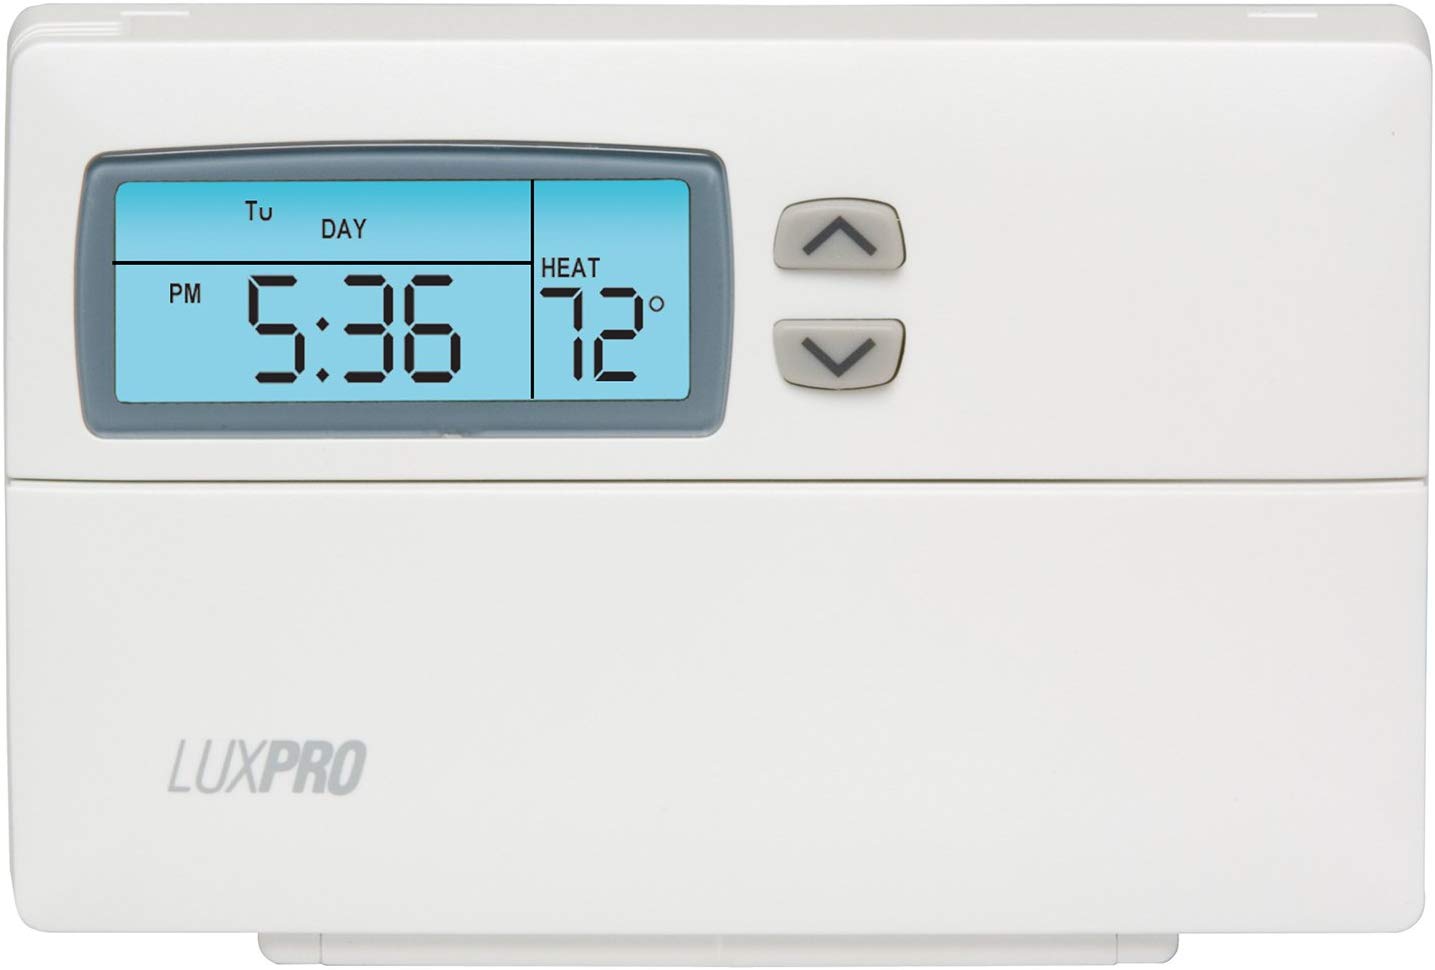 LUXPRO Deluxe 5-2 Day Programmable Thermostat